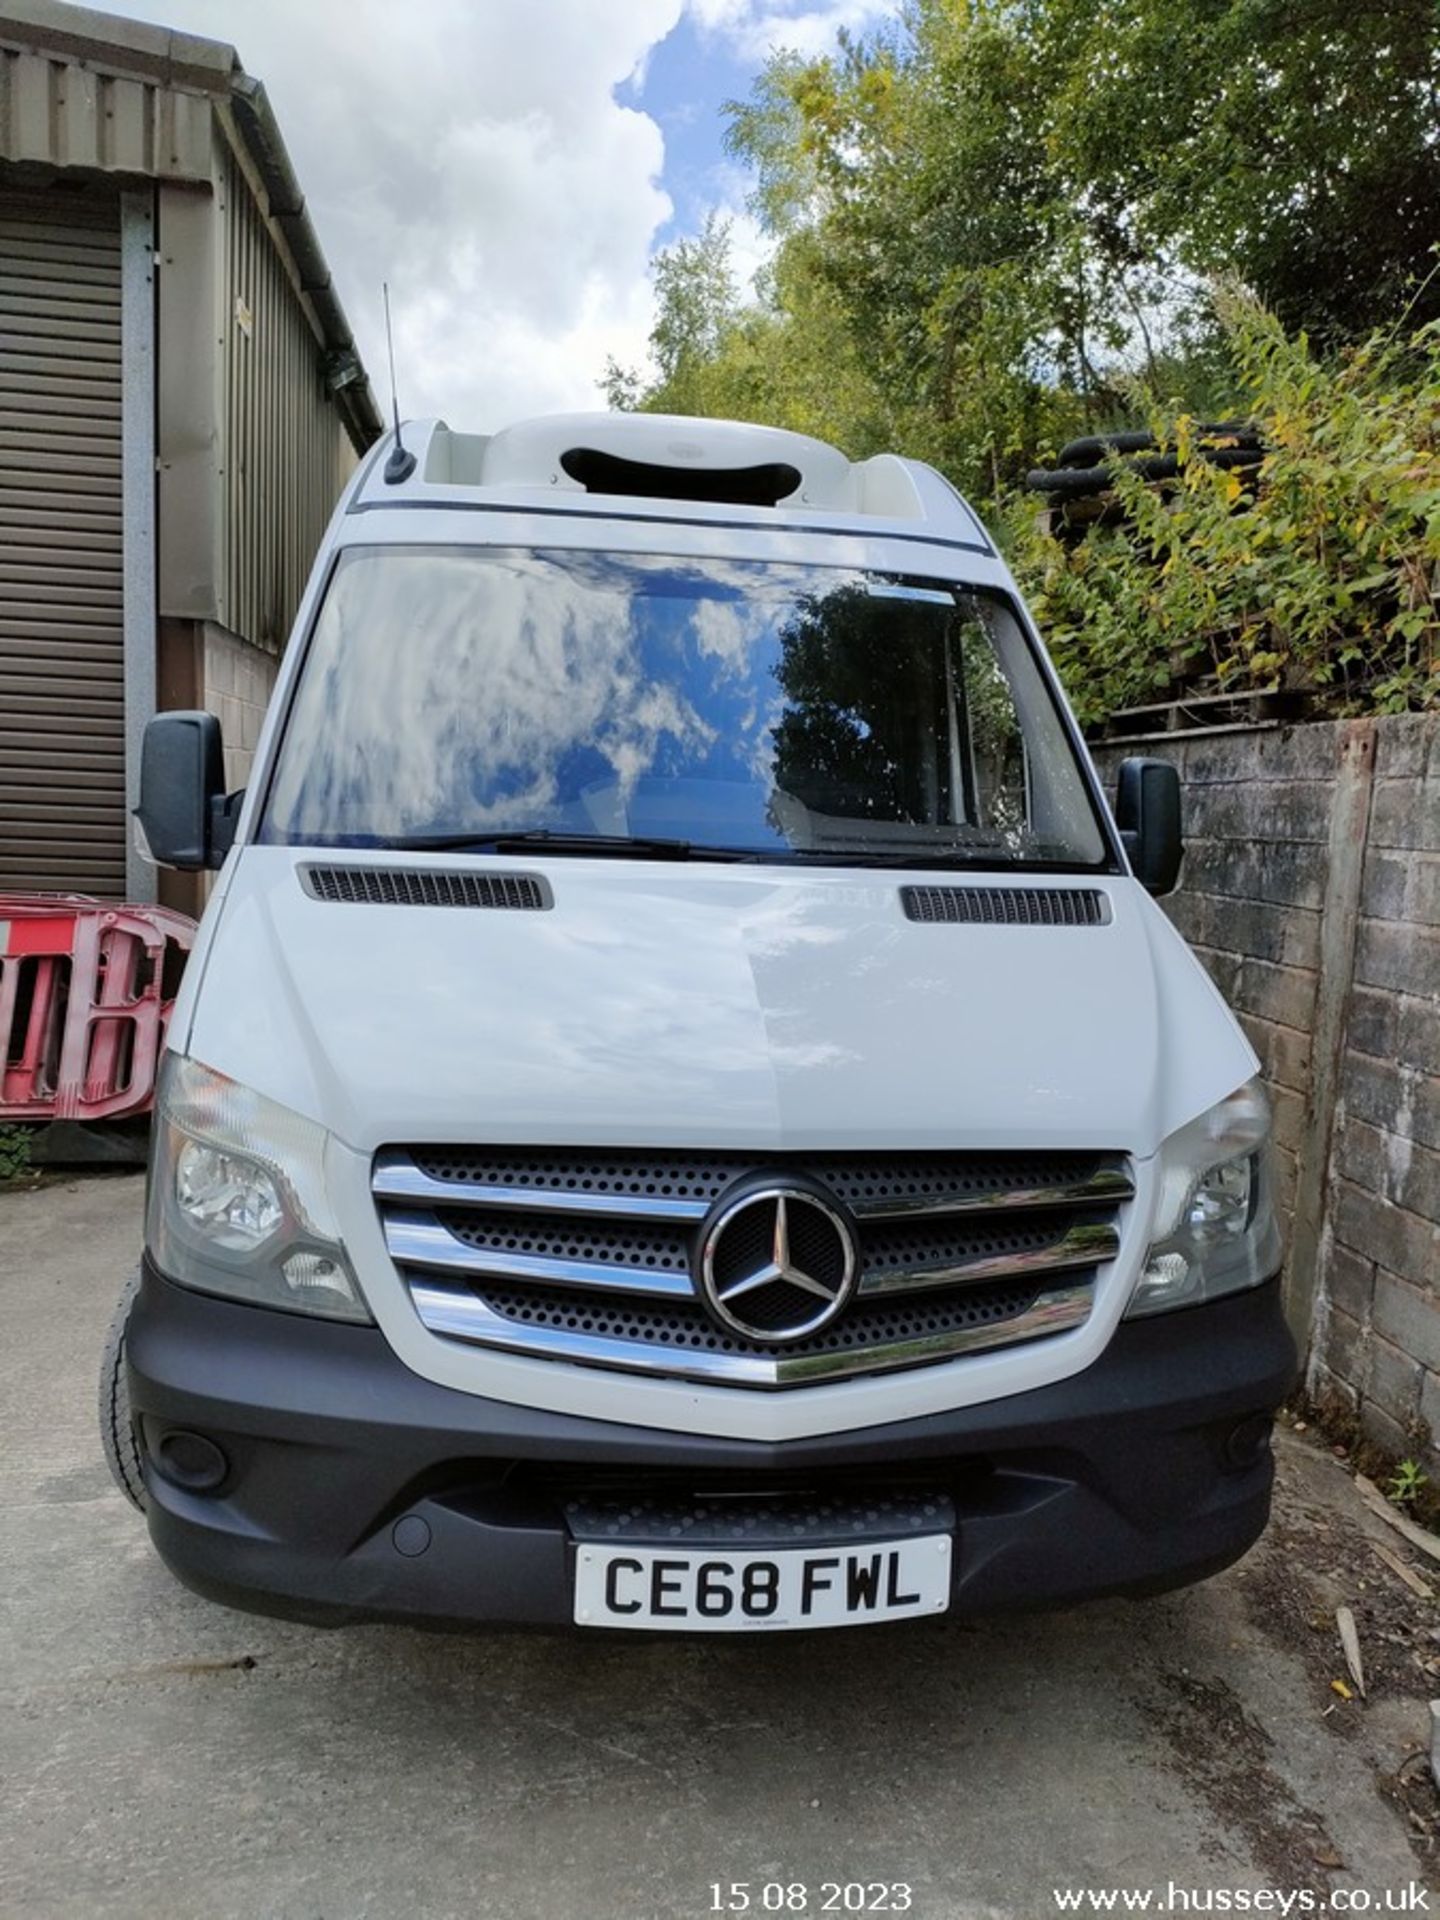 18/68 MERCEDES-BENZ SPRINTER 314CDI - 2143cc 5dr Refrigerated (White) - Image 19 of 40